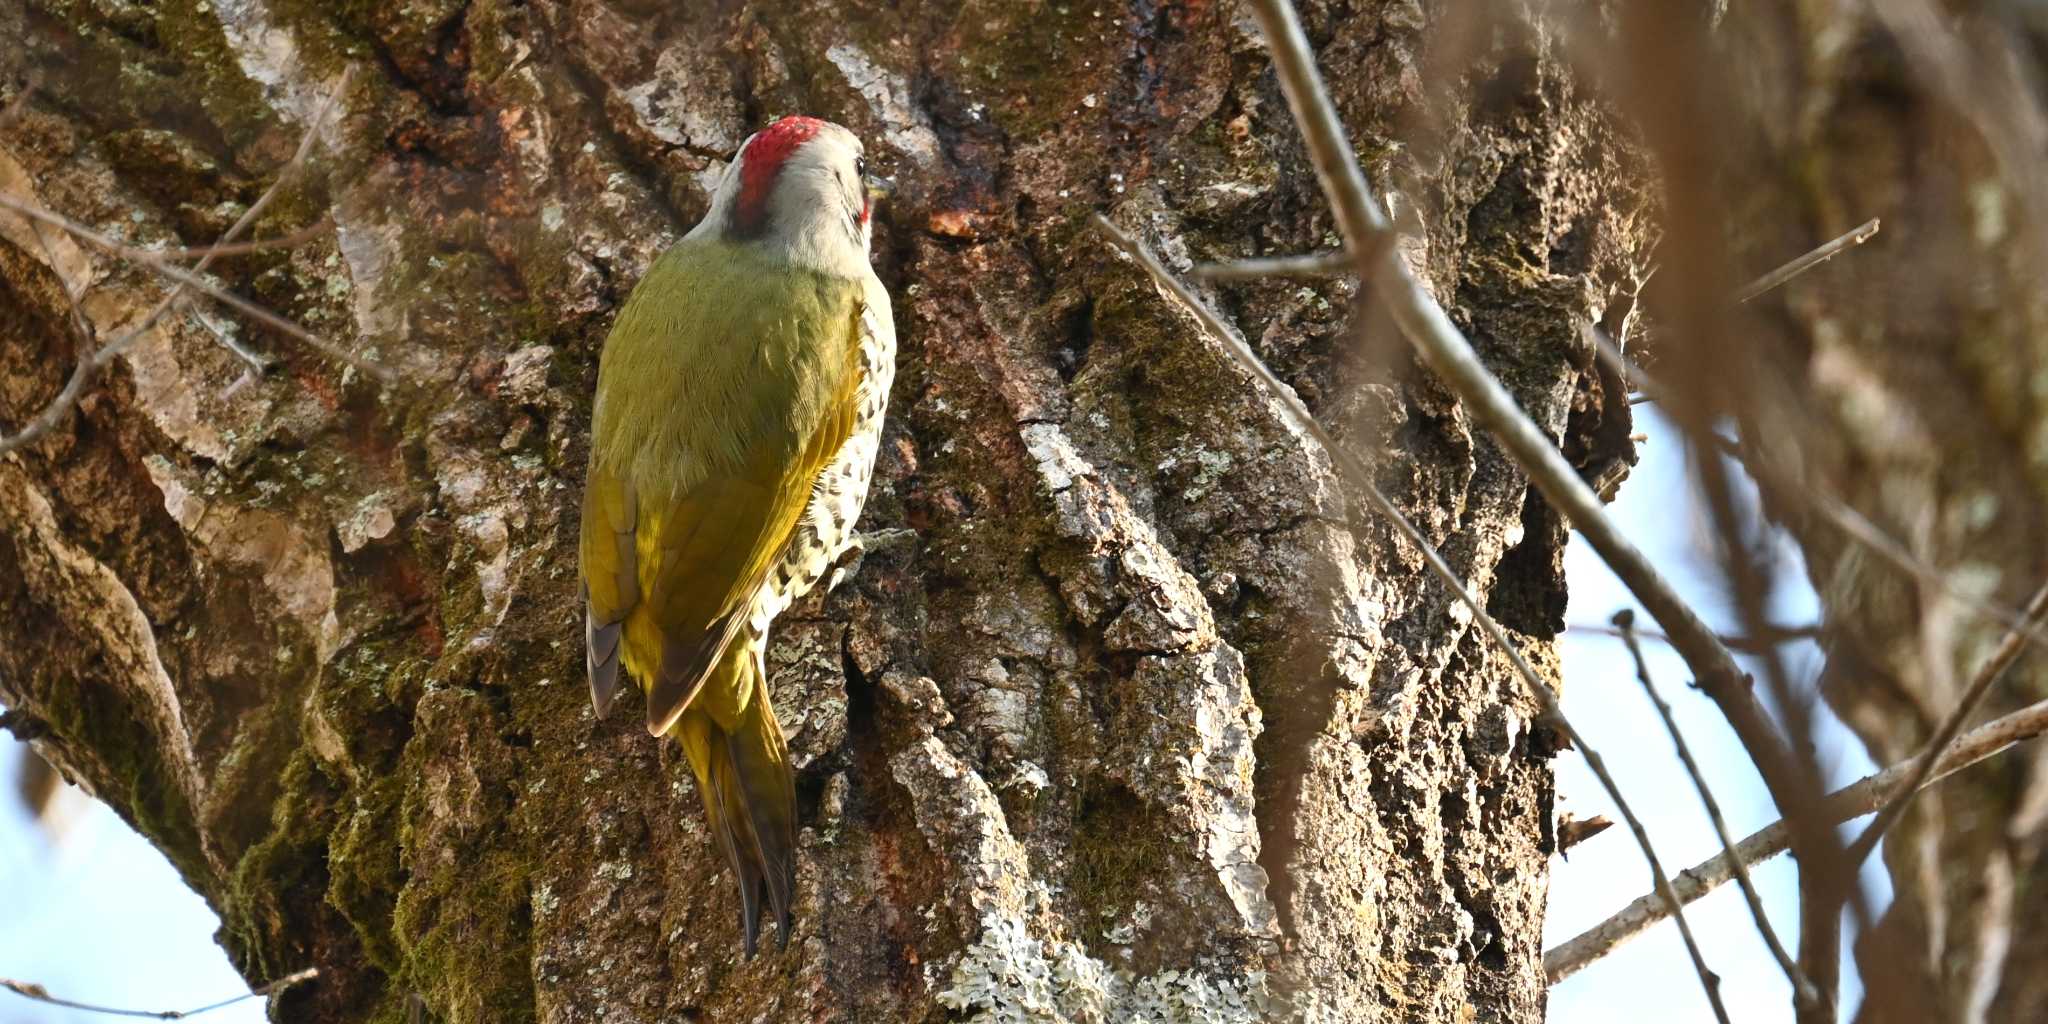 Photo of Japanese Green Woodpecker at Mt. Takao by FUJICAZC1000